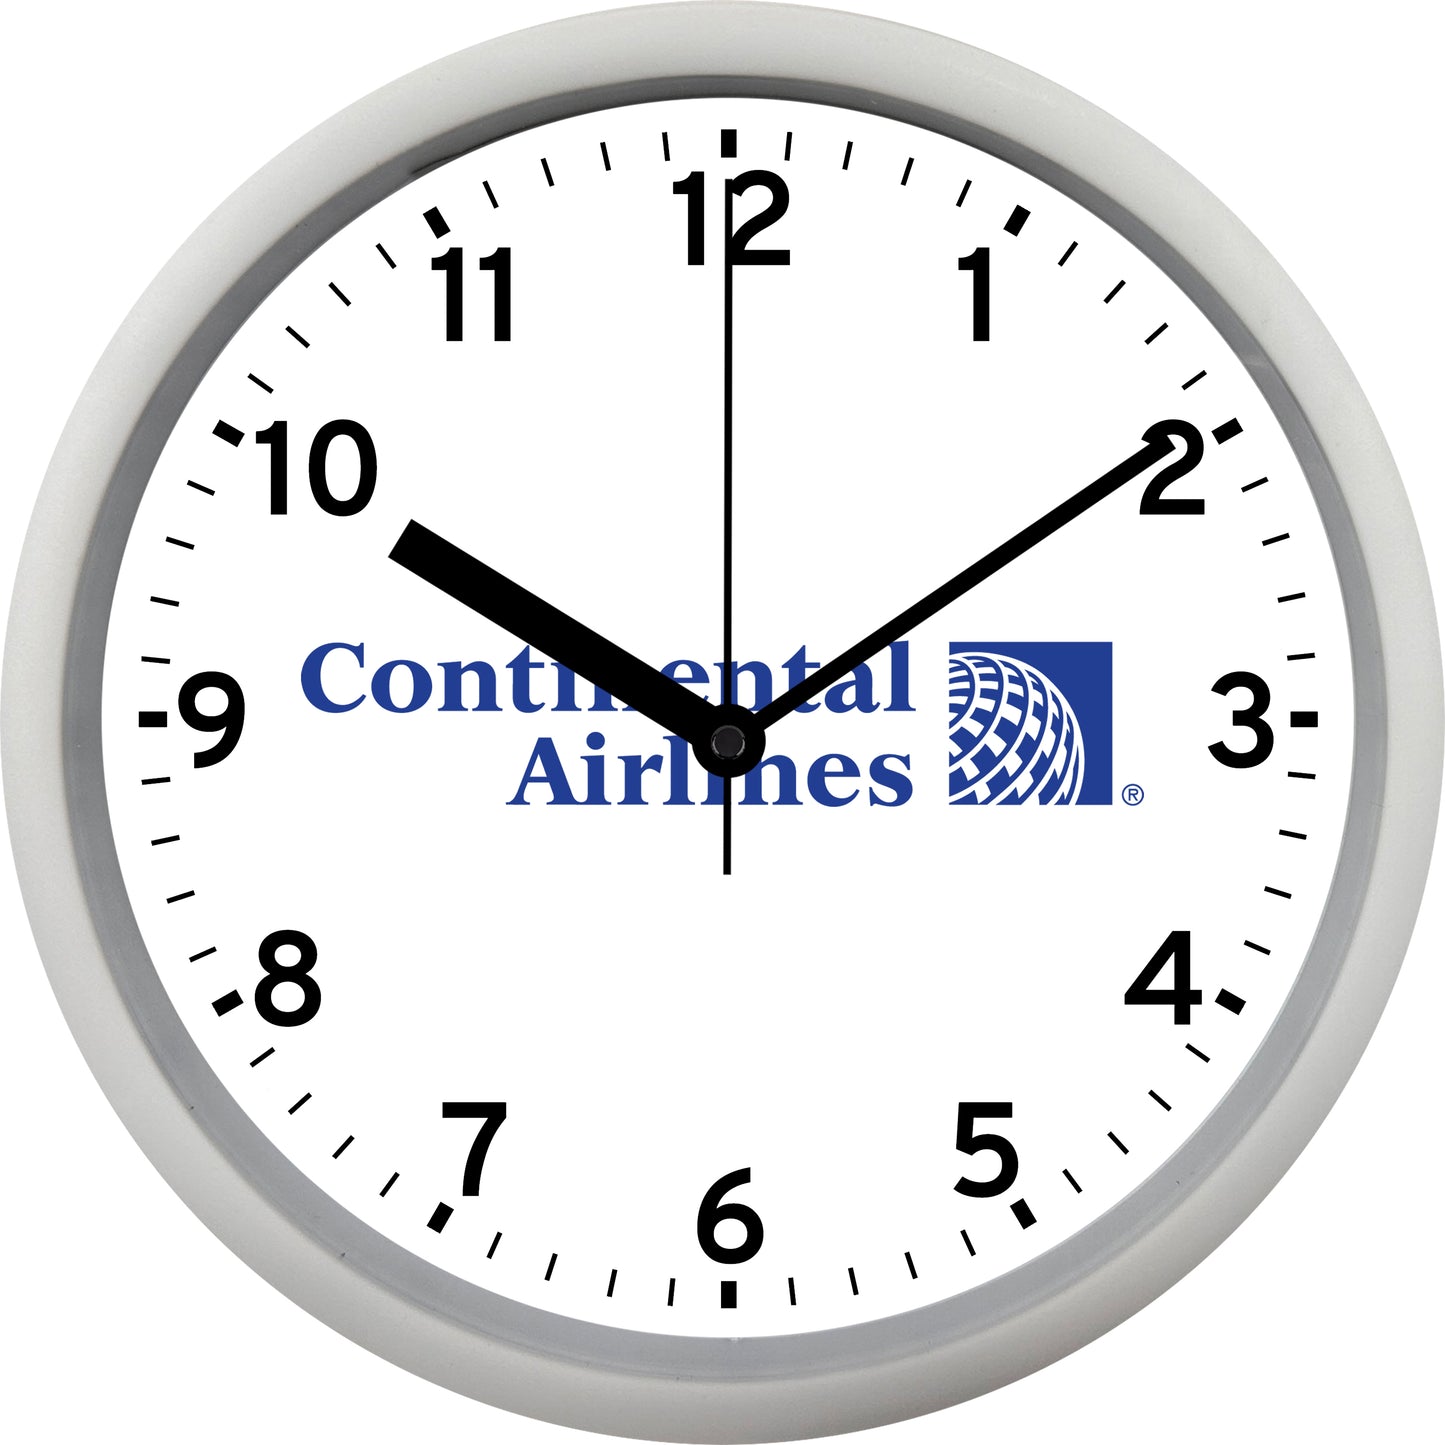 Continental Airlines Wall Clock